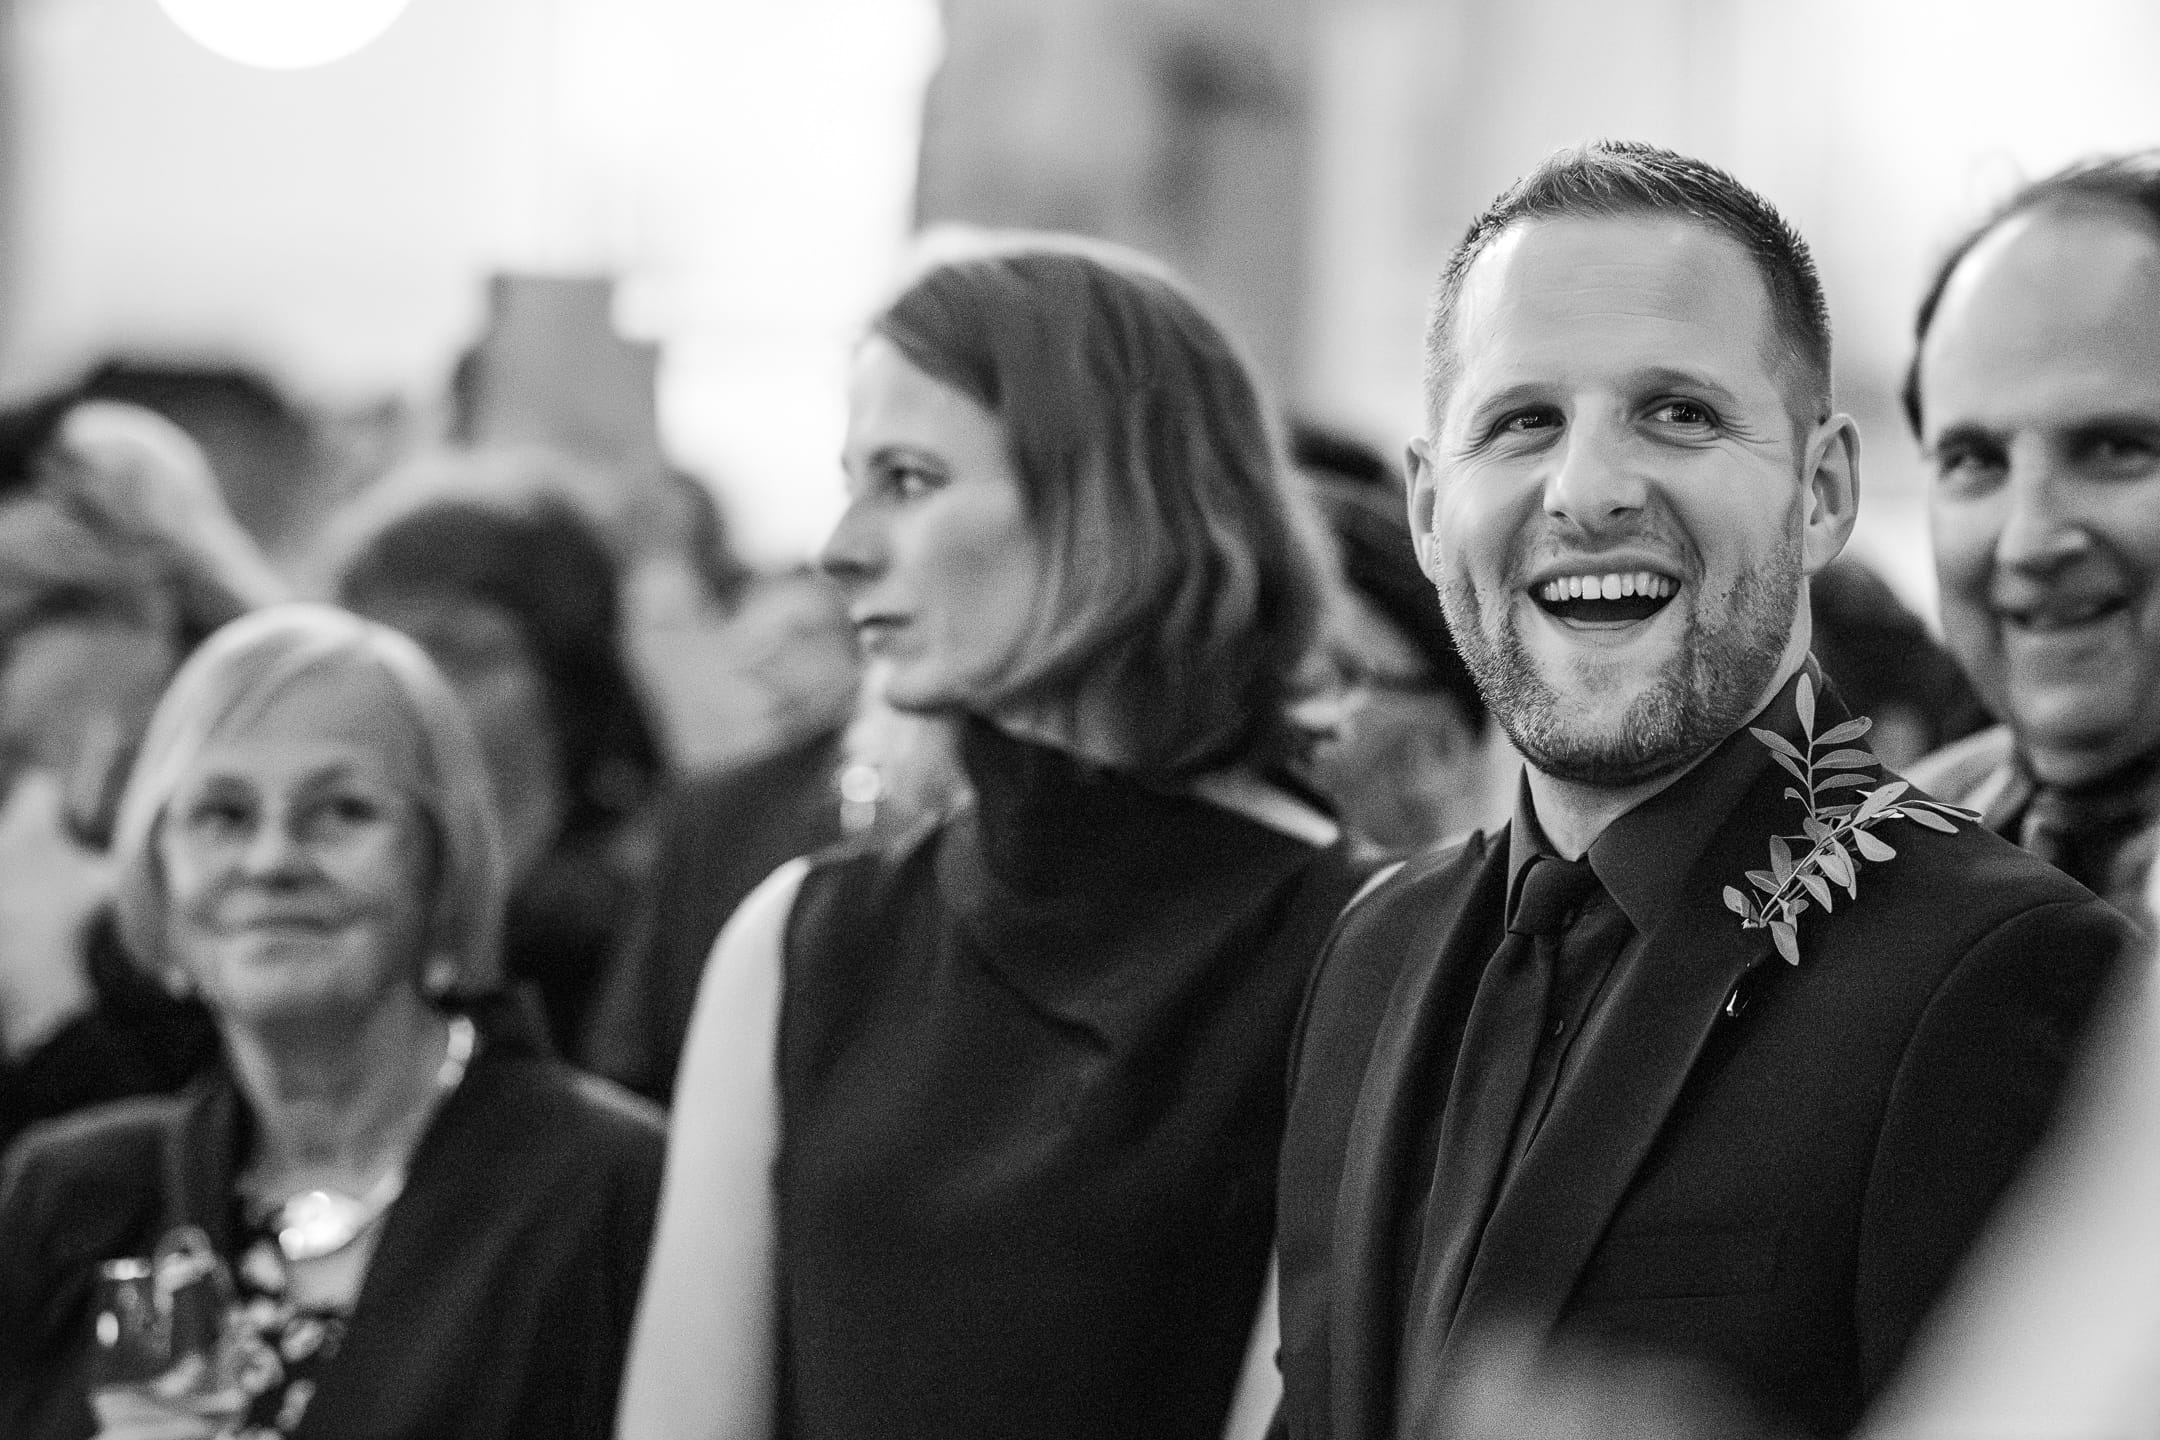 Guests laughing during speeches at the Oxford Natural History Museum wedding reception.